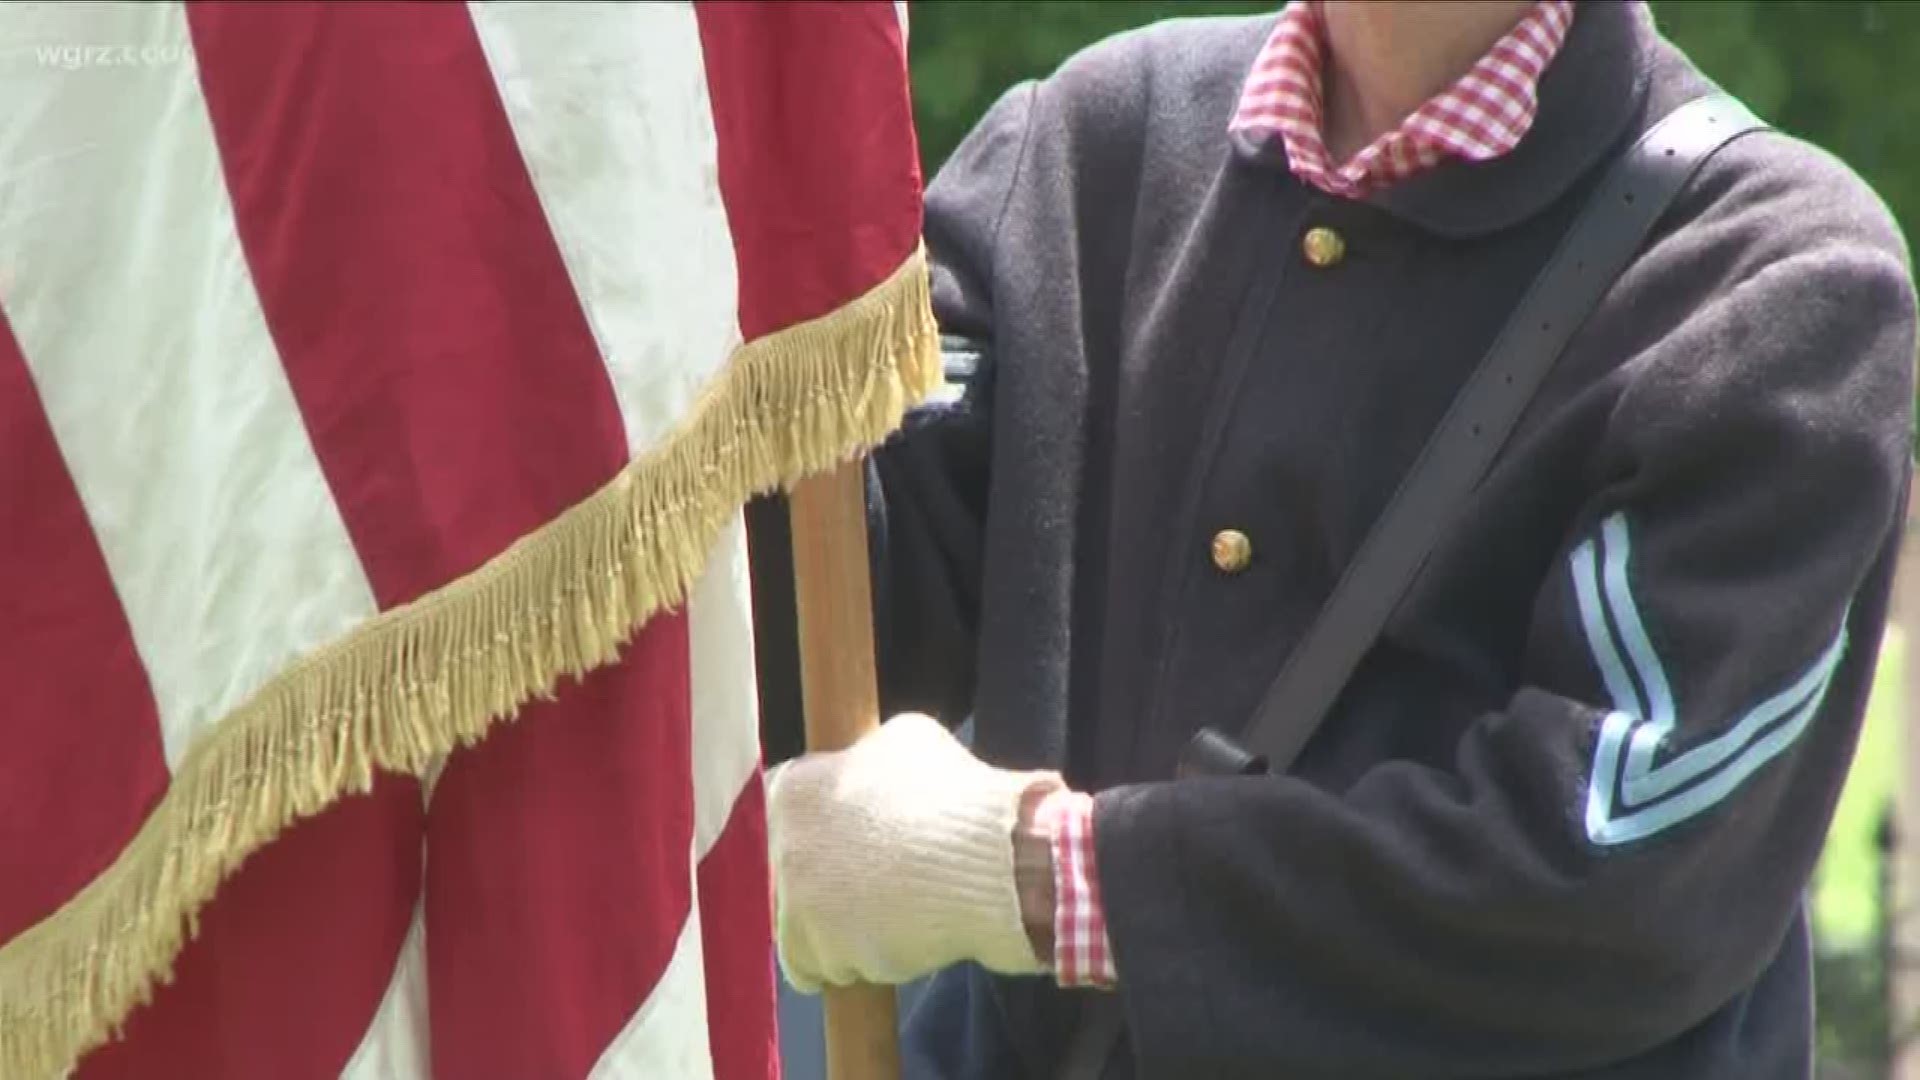 On Monday, Forest Lawn will host its annual ceremony with the American Legion Post.